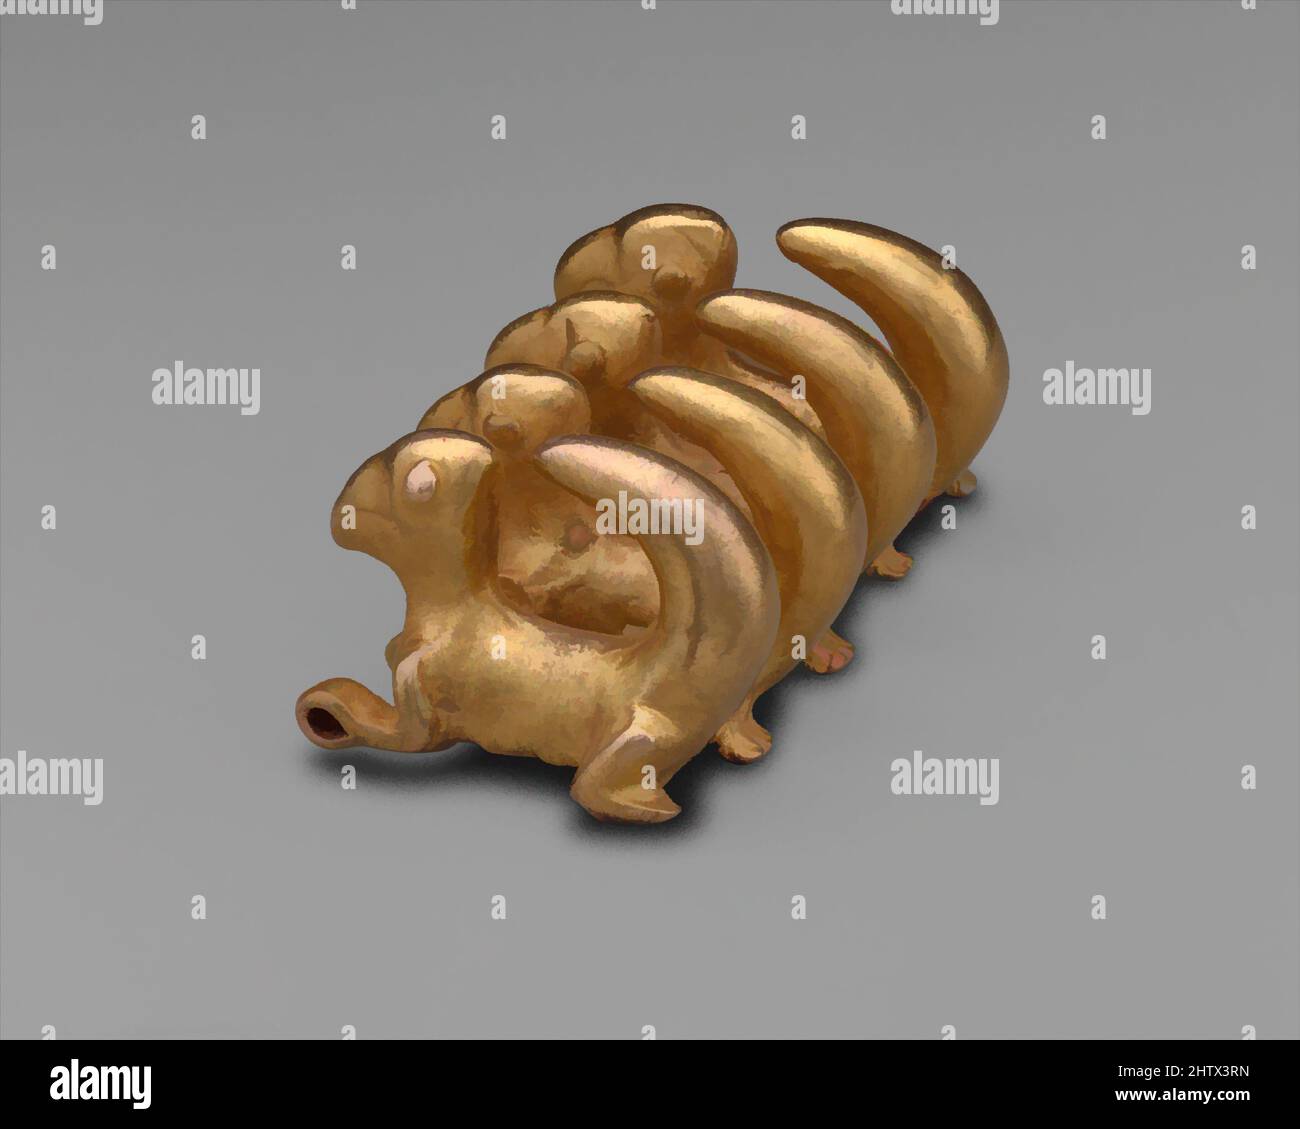 Art inspired by Curly-Tailed Animal Pendant, A.D. 100–500, Panama, Chiriqui (?), Initial Style, Gold, H. 1 1/4 × W. 2 3/4 × D. 1 1/2 in. (3.2 × 7 × 3.8 cm), Metal-Ornaments, Curly-tailed animals appear on pendants in groups of two, four, or six, though single animals are more common, Classic works modernized by Artotop with a splash of modernity. Shapes, color and value, eye-catching visual impact on art. Emotions through freedom of artworks in a contemporary way. A timeless message pursuing a wildly creative new direction. Artists turning to the digital medium and creating the Artotop NFT Stock Photo